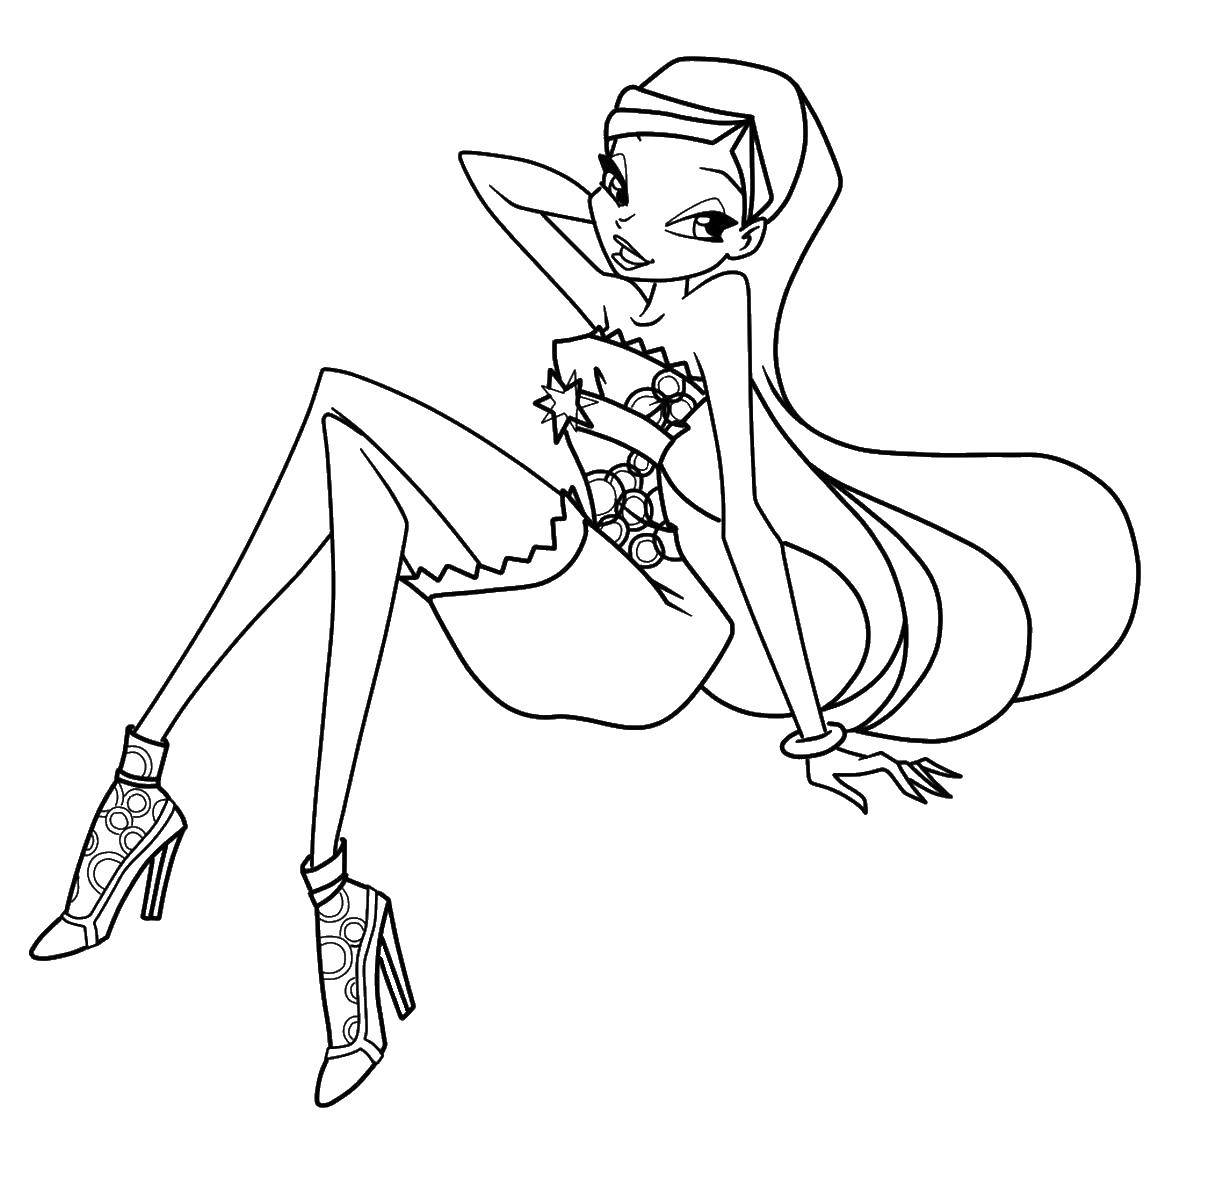 Coloring Stella in a beautiful dress. Category Winx. Tags:  Stella, Winx.